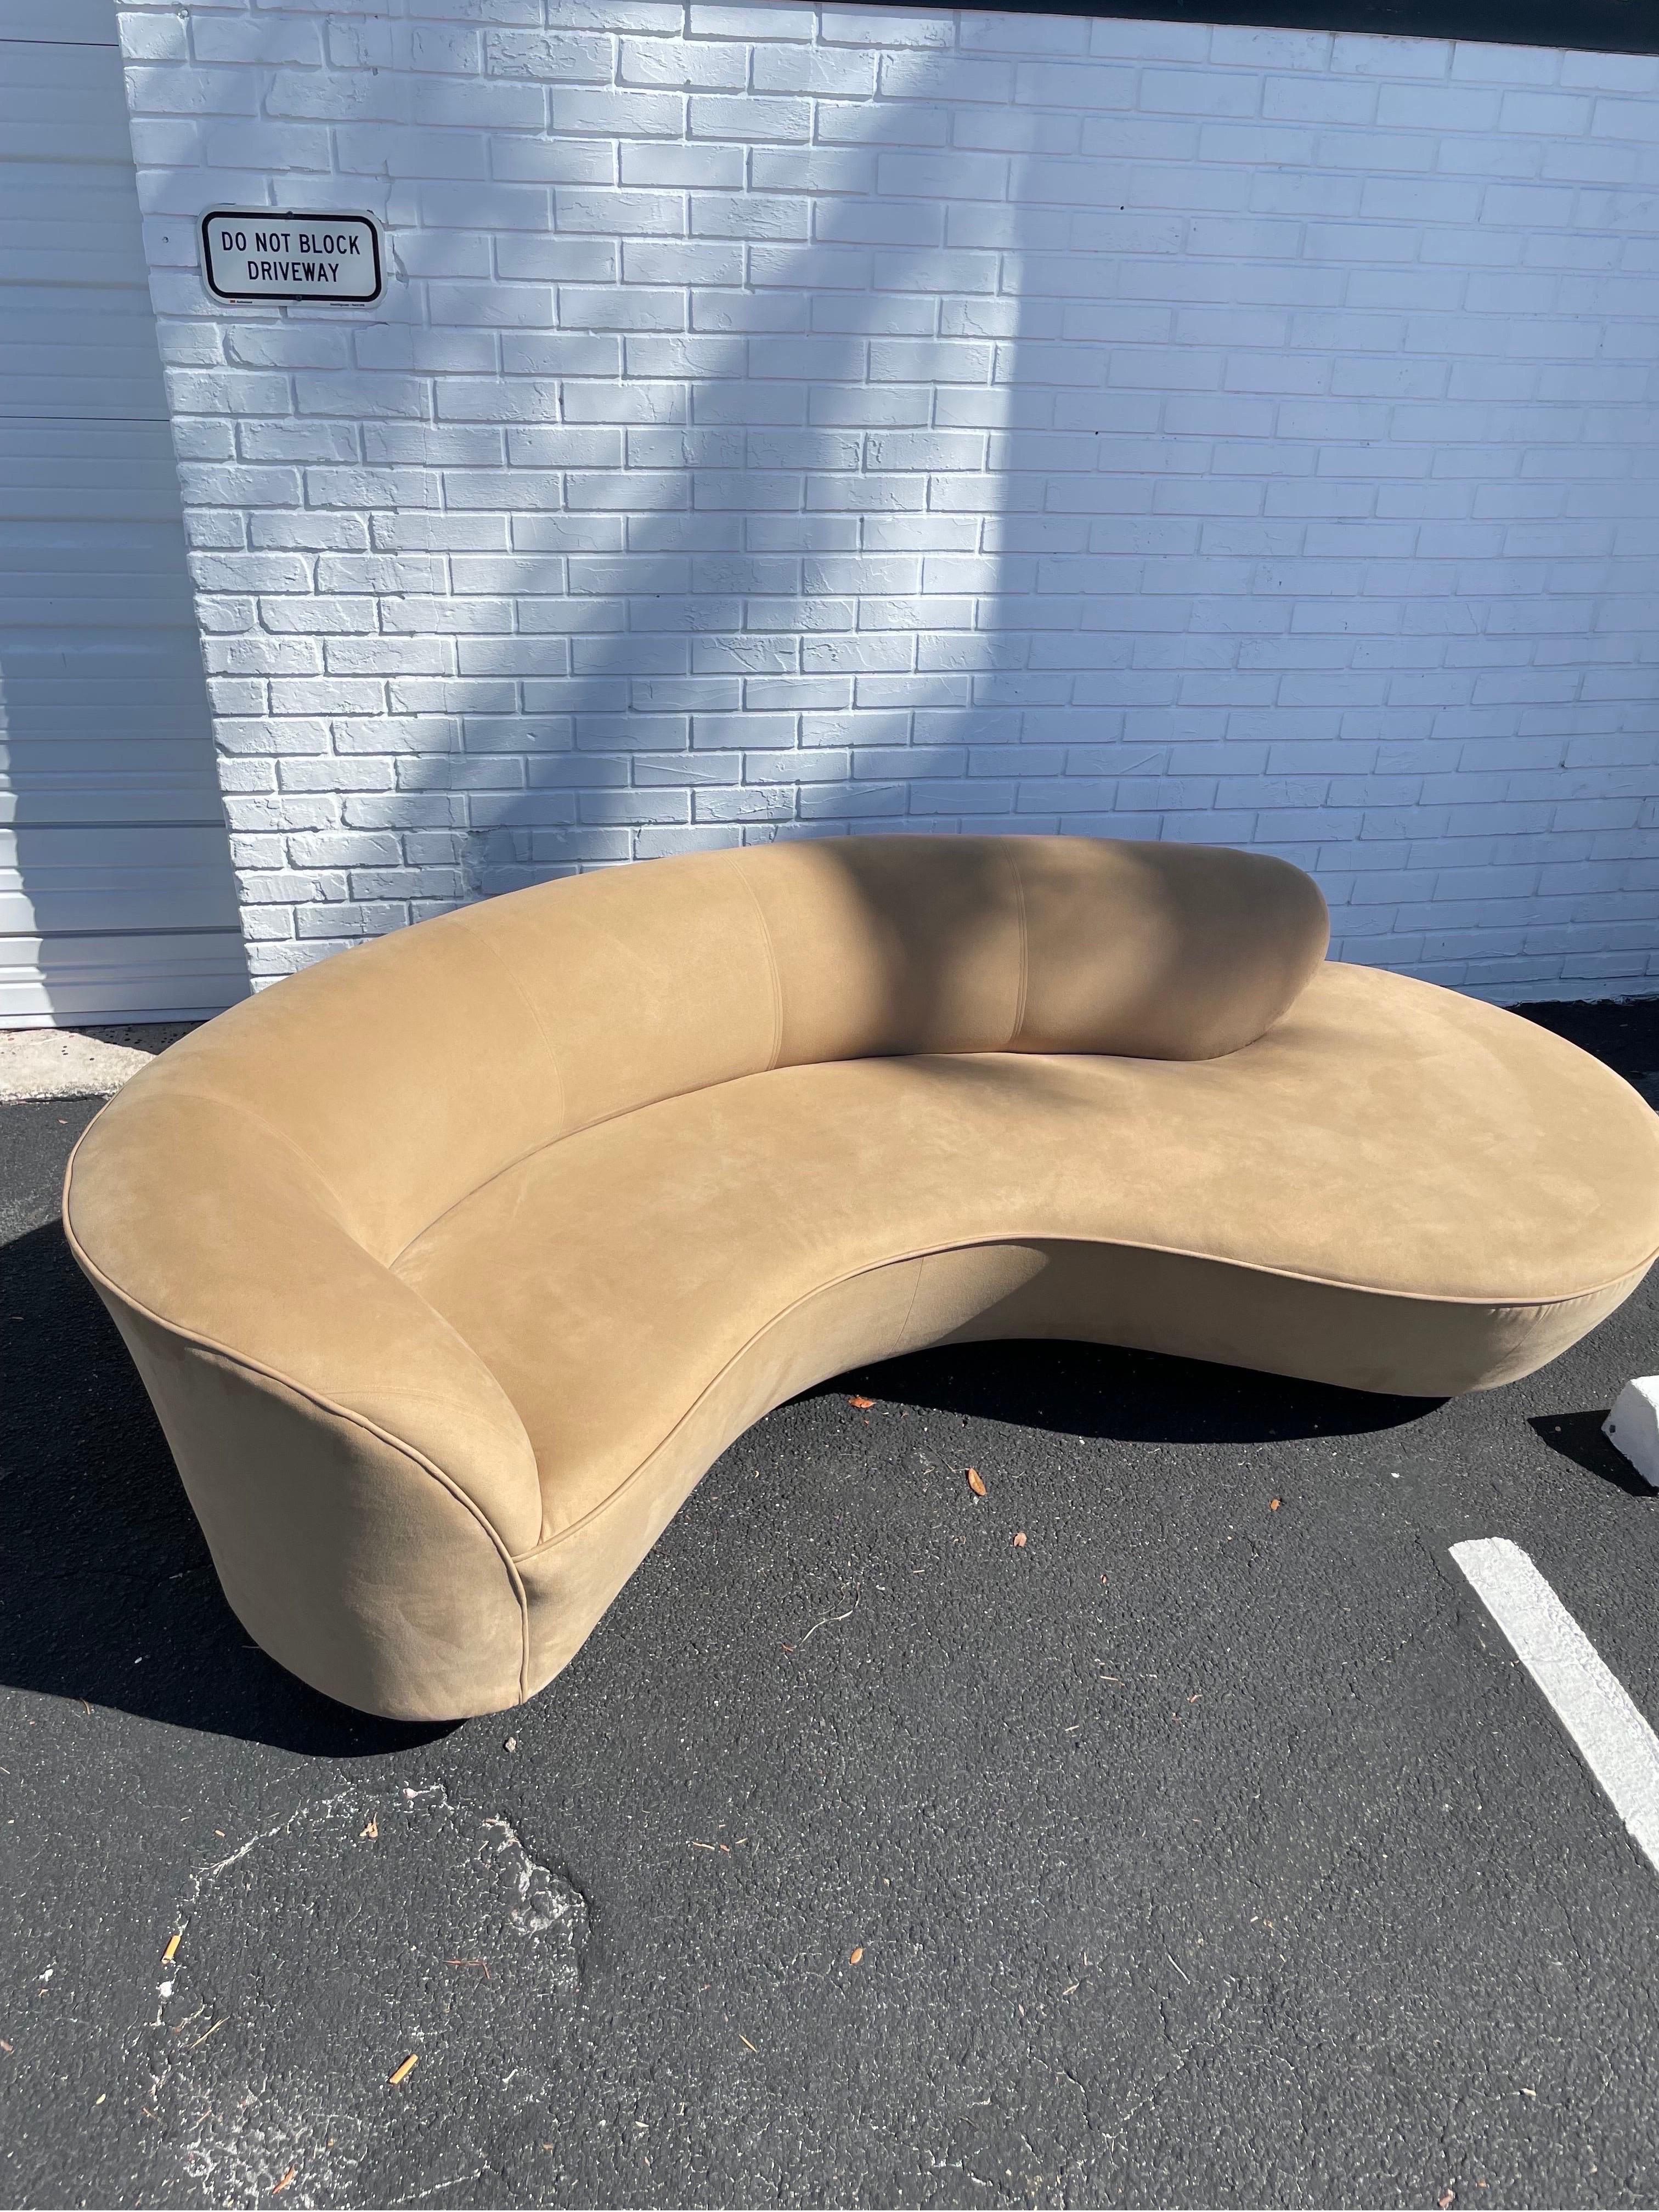 Authentic Vladimir Kagan for Directional “Cloud” Sofa. Original tan microfiber fabric. Some water marks on seat please see pictures. Label on bottom.